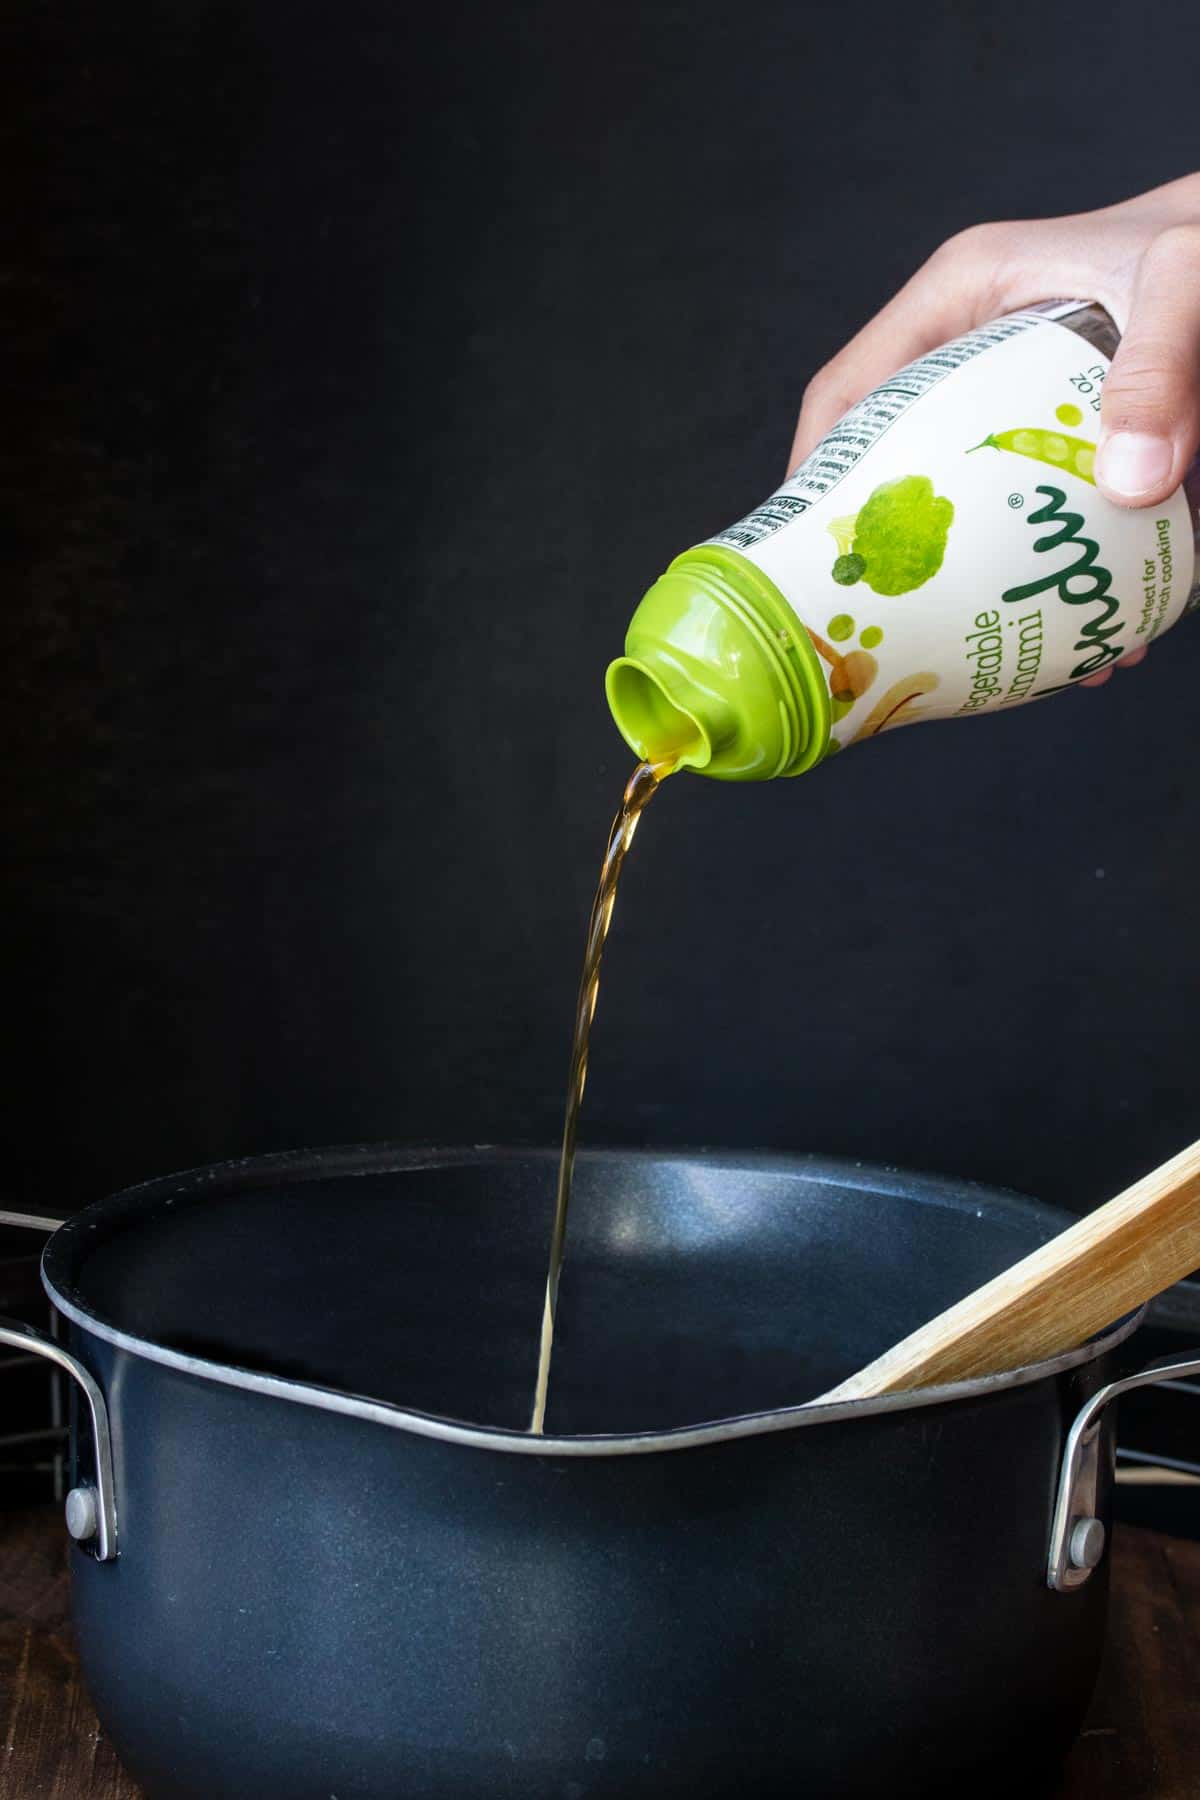 Hand pouring liquid out of a green and white container into a pot